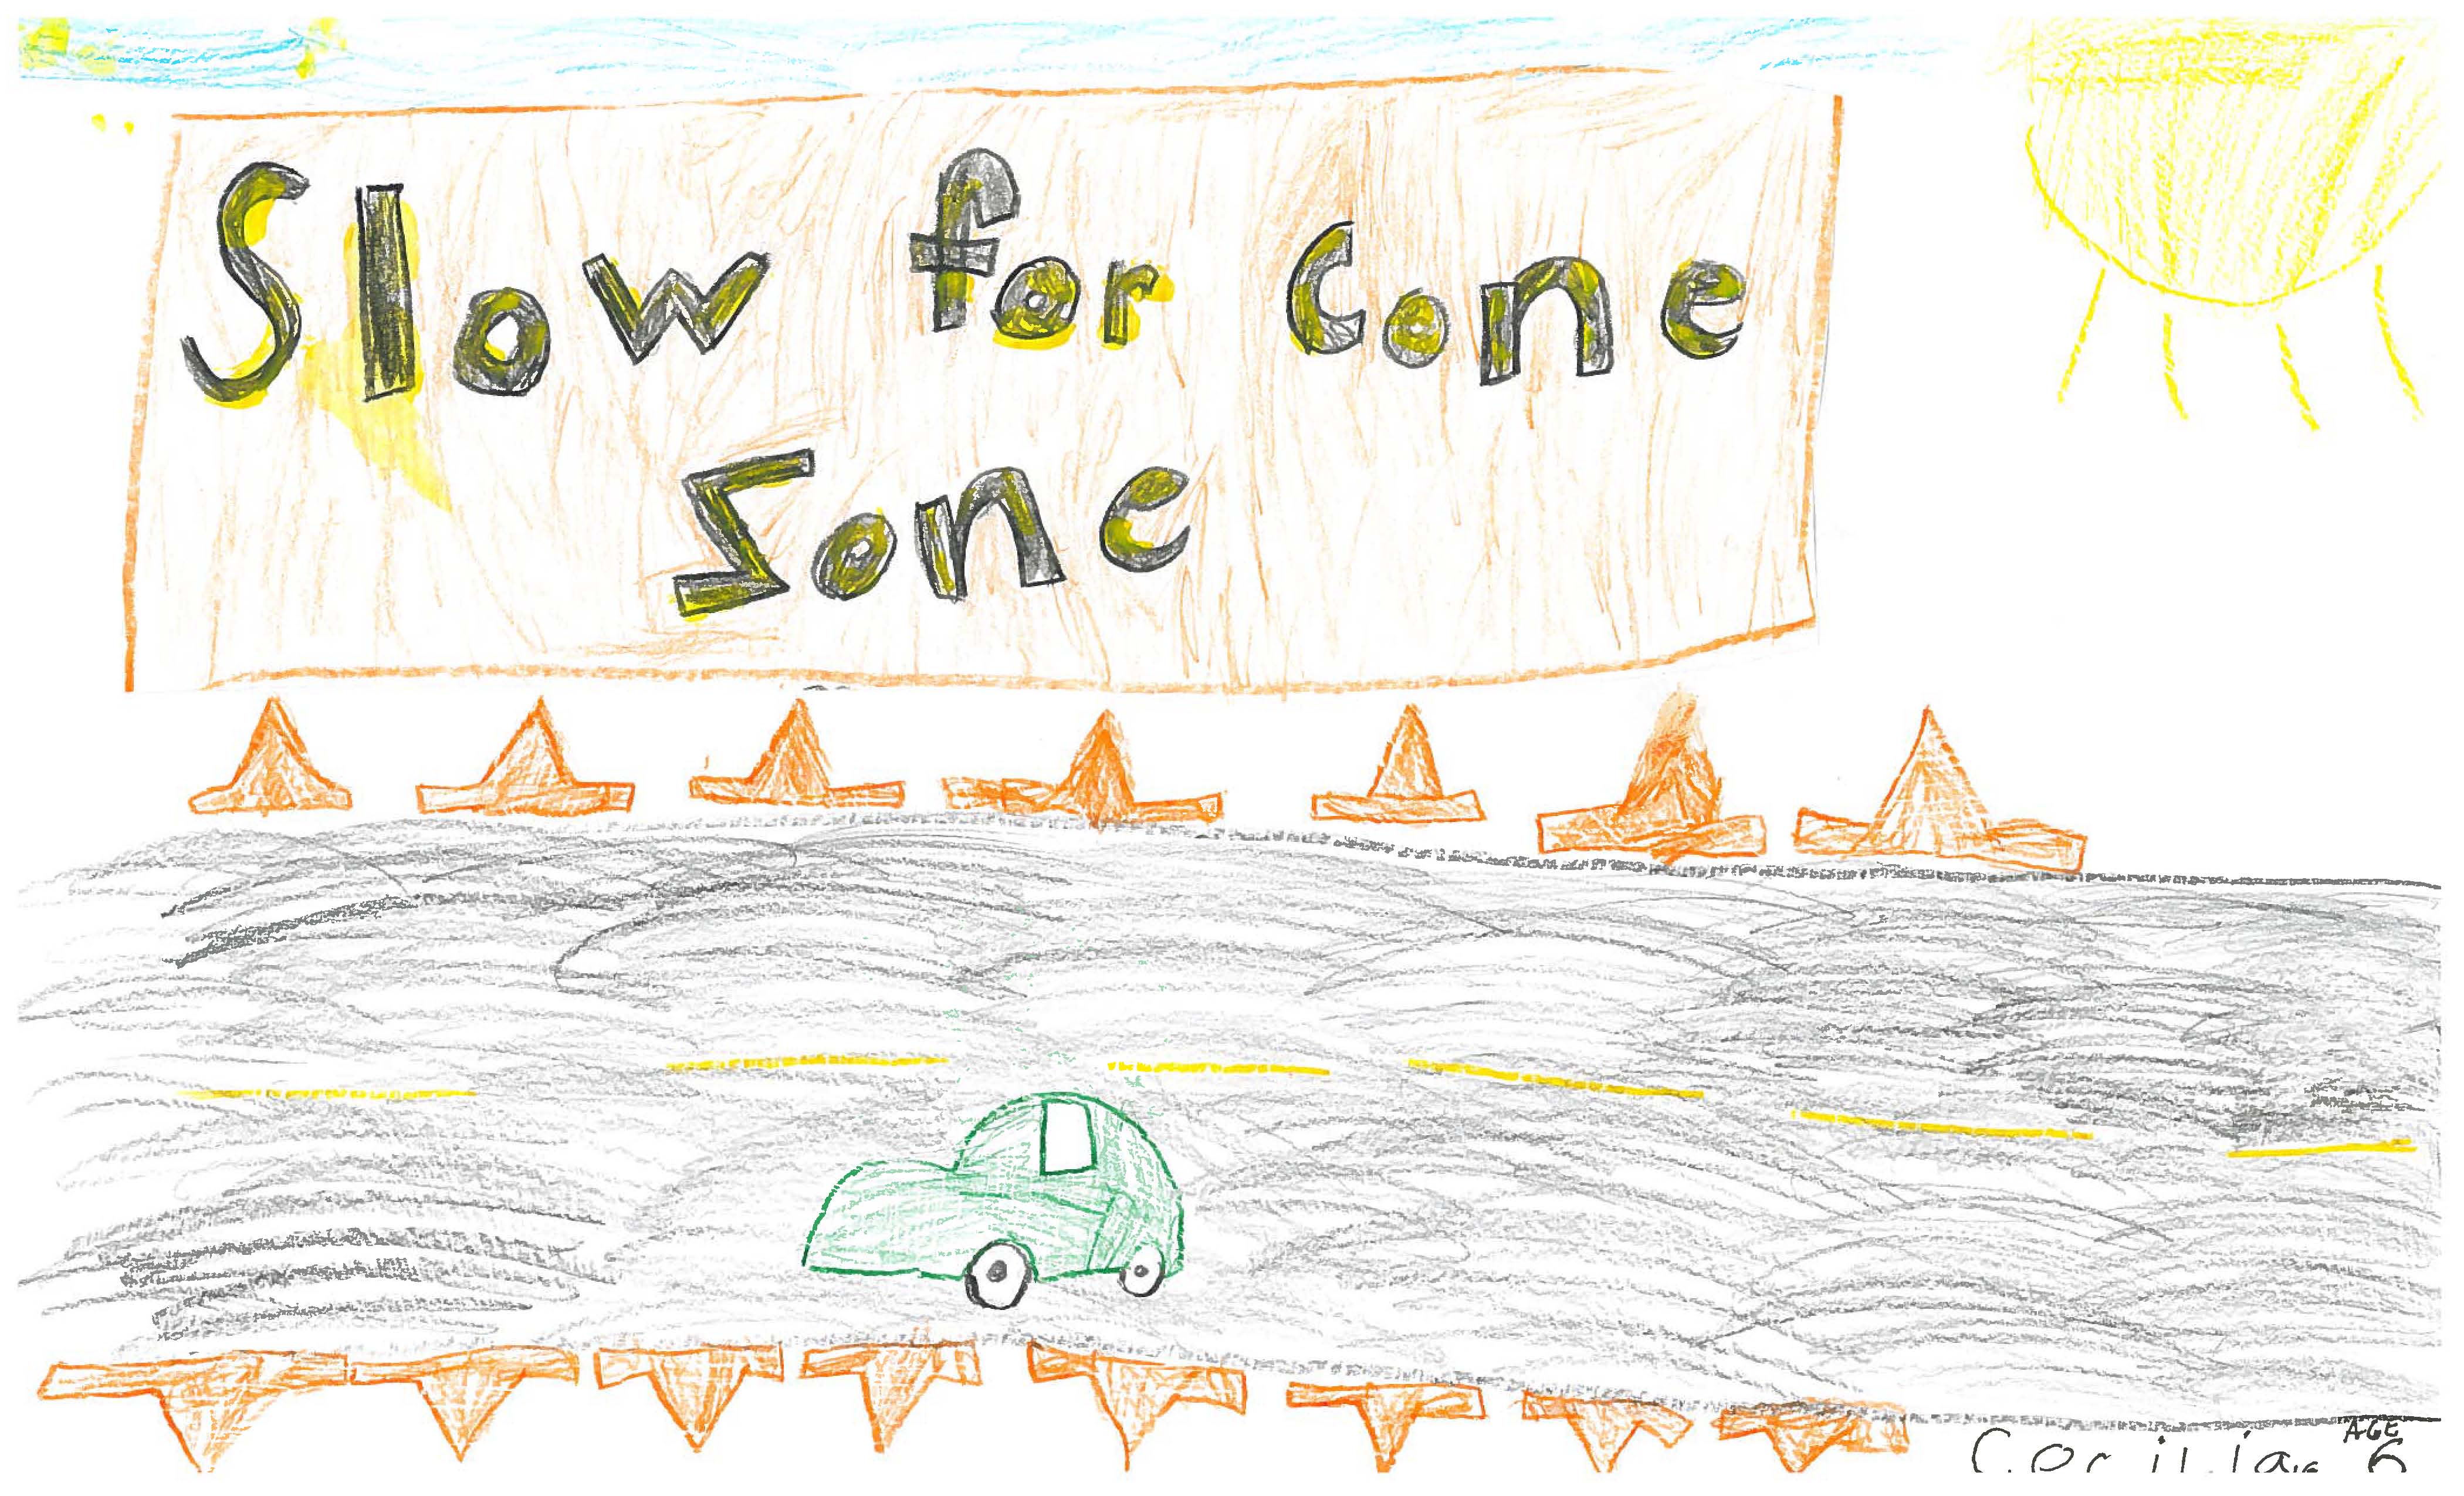 6-8 Year Old Cone Zone Poster Contest Winner detail image